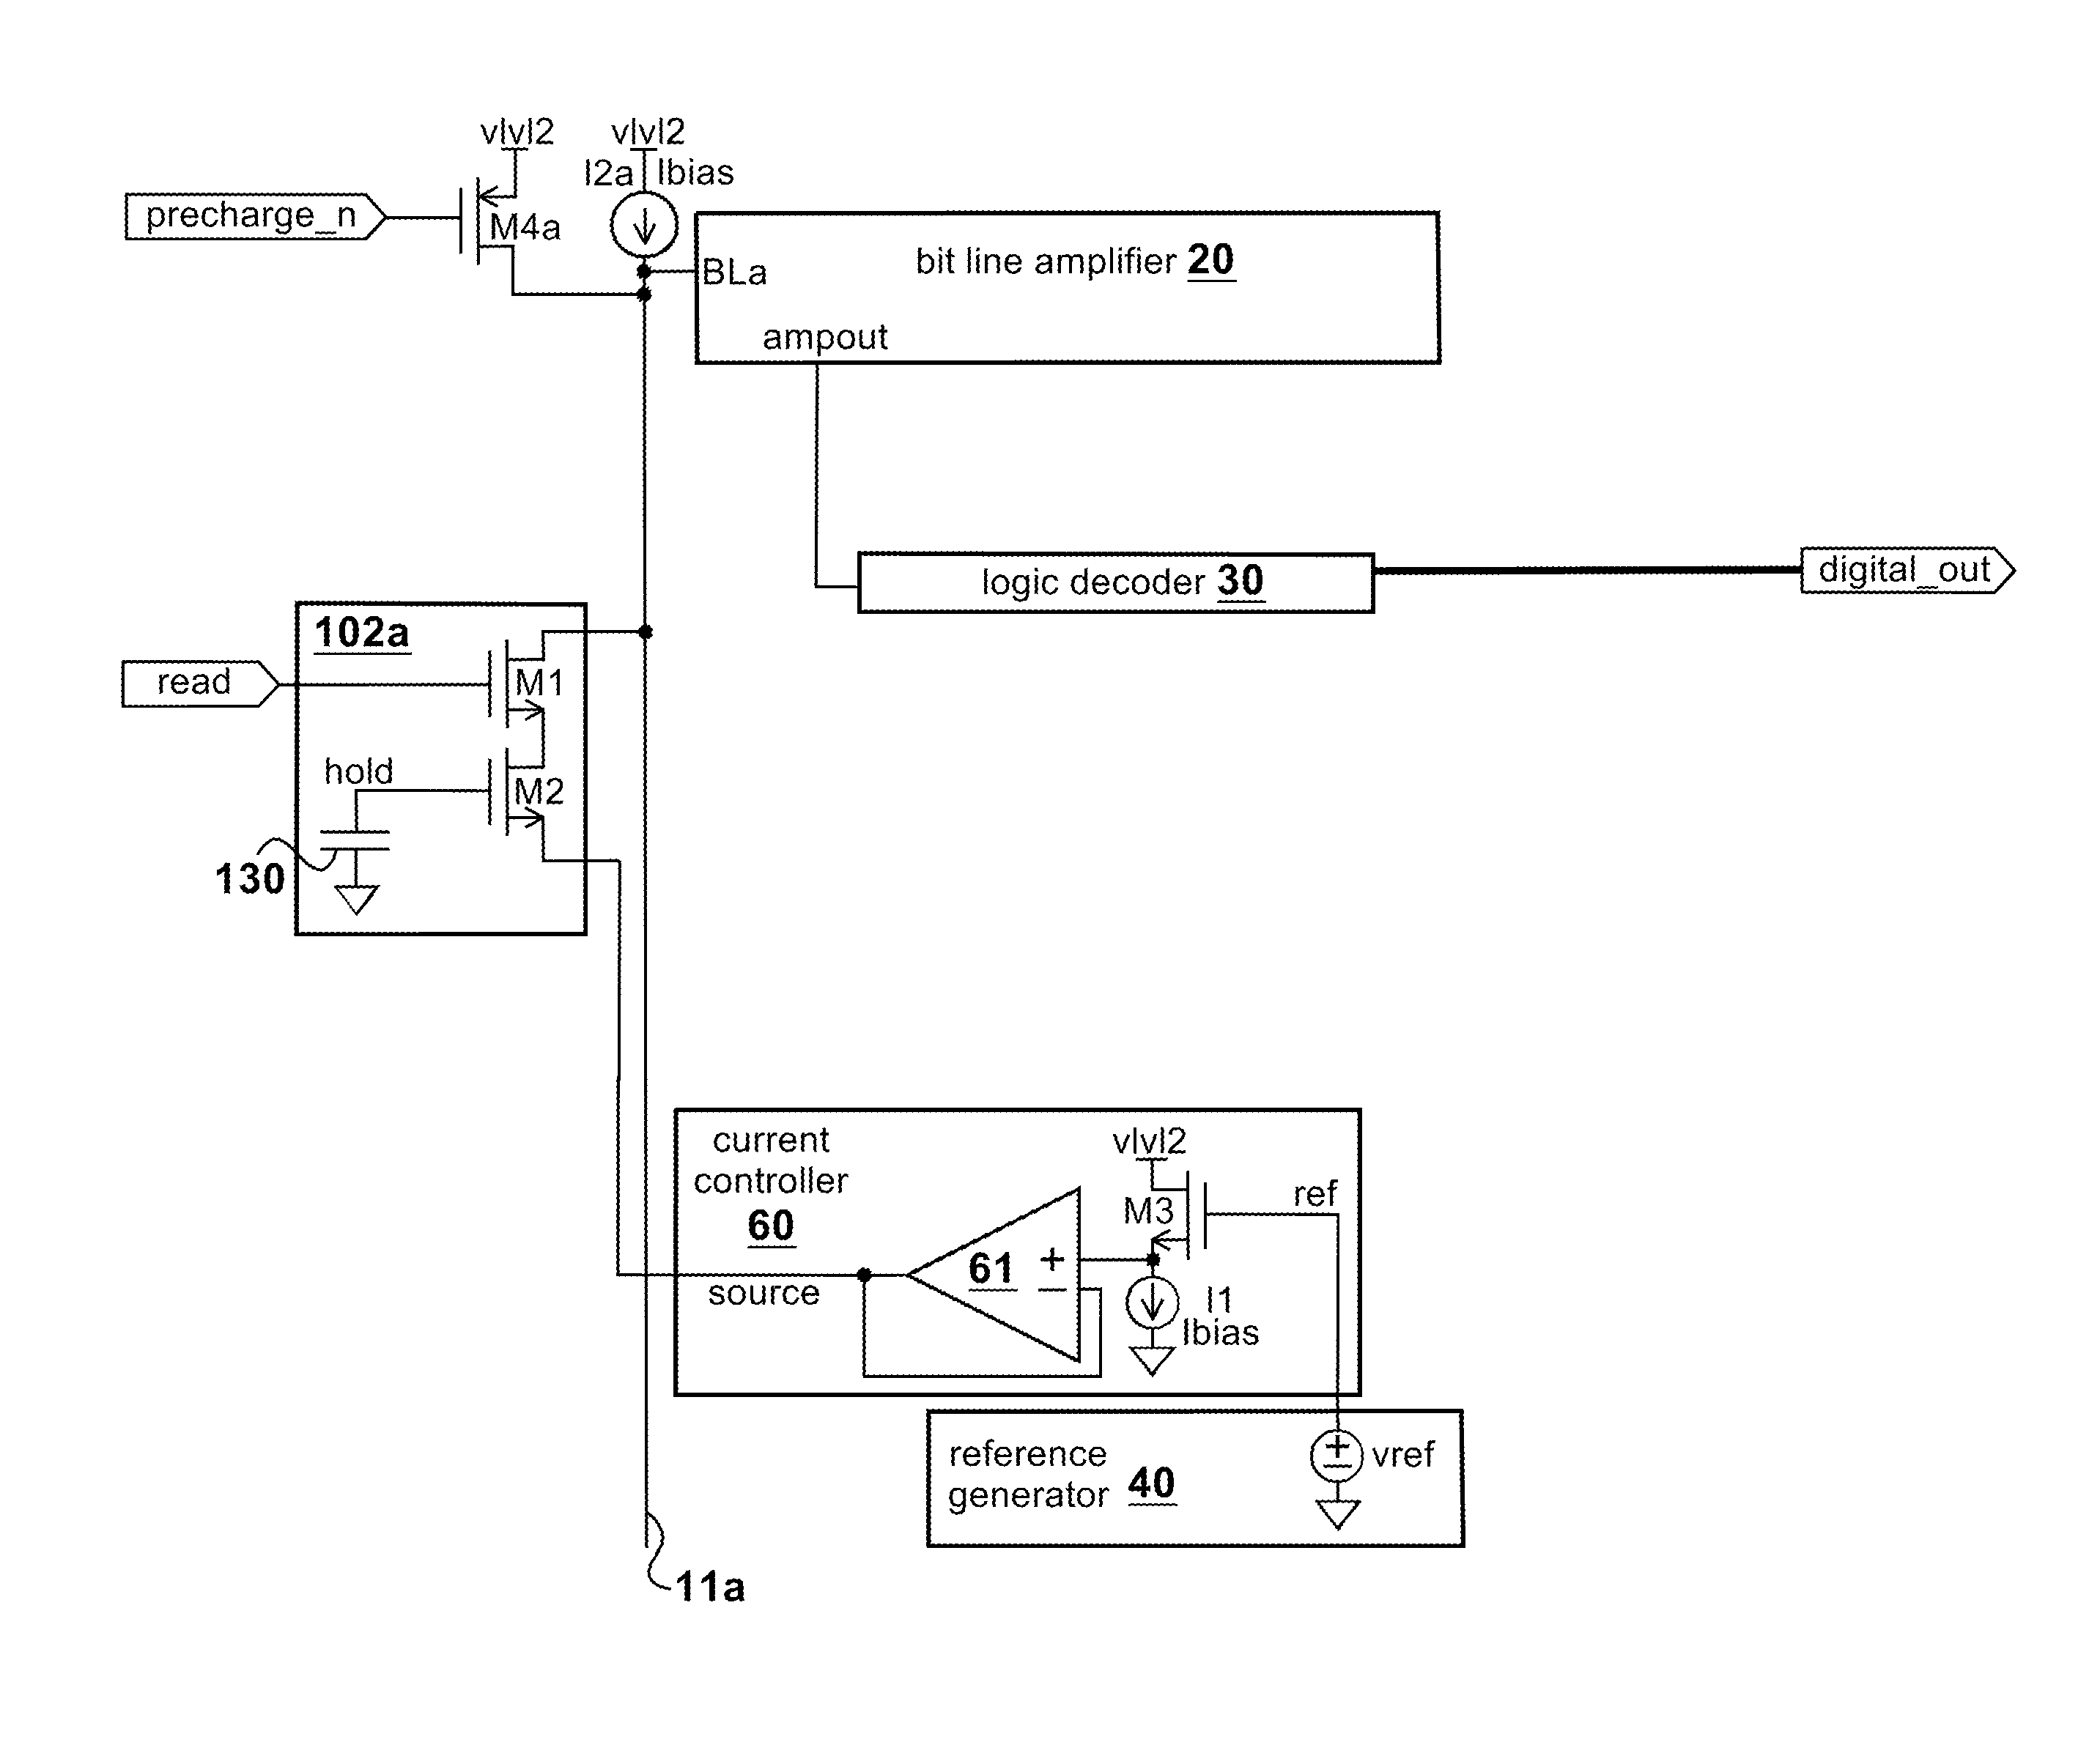 Memory architecture with a current controller and reduced power requirements